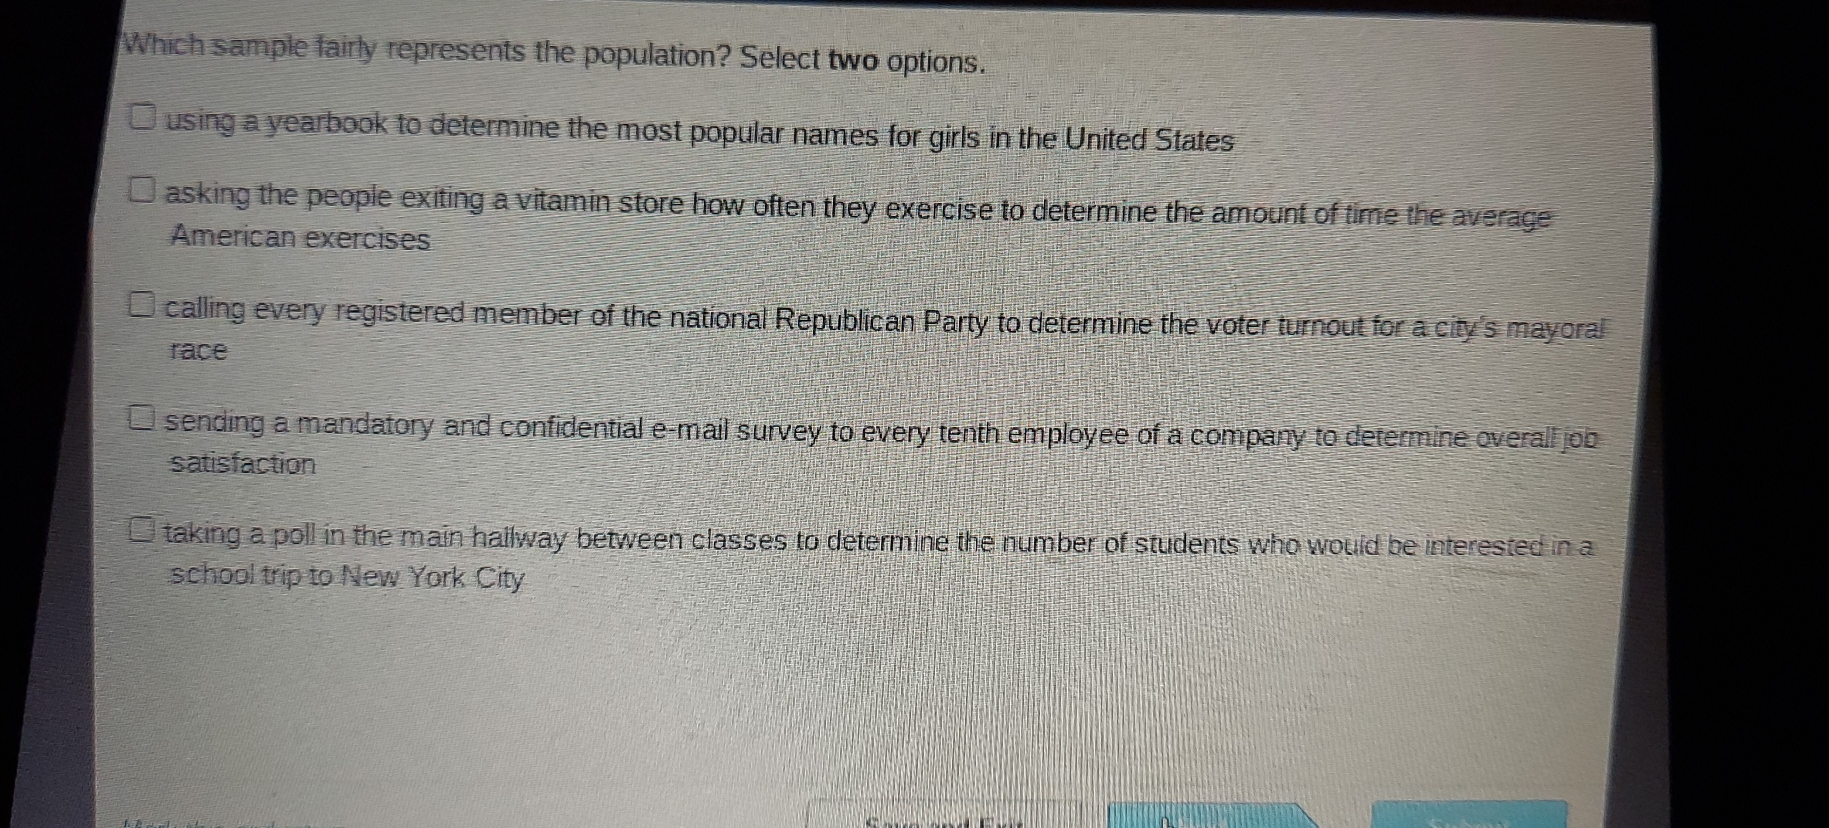 Which sample fairly represents the population? Select two options. using a yearbook to determine the most popular names for girls in the United States asking the people exiting a vitamin store how often they exercise to determine the amount of time the average American exercises calling every registered member of the national Republican Party to determine the voter turnout for a city's mayoral race sending a mandatory and confidential e-mail survey to every tenth employee of a company to determine overall job satisfaction taking a poll in the main hailway between classes to determine the number of students who would be interested in a school trip to New York City